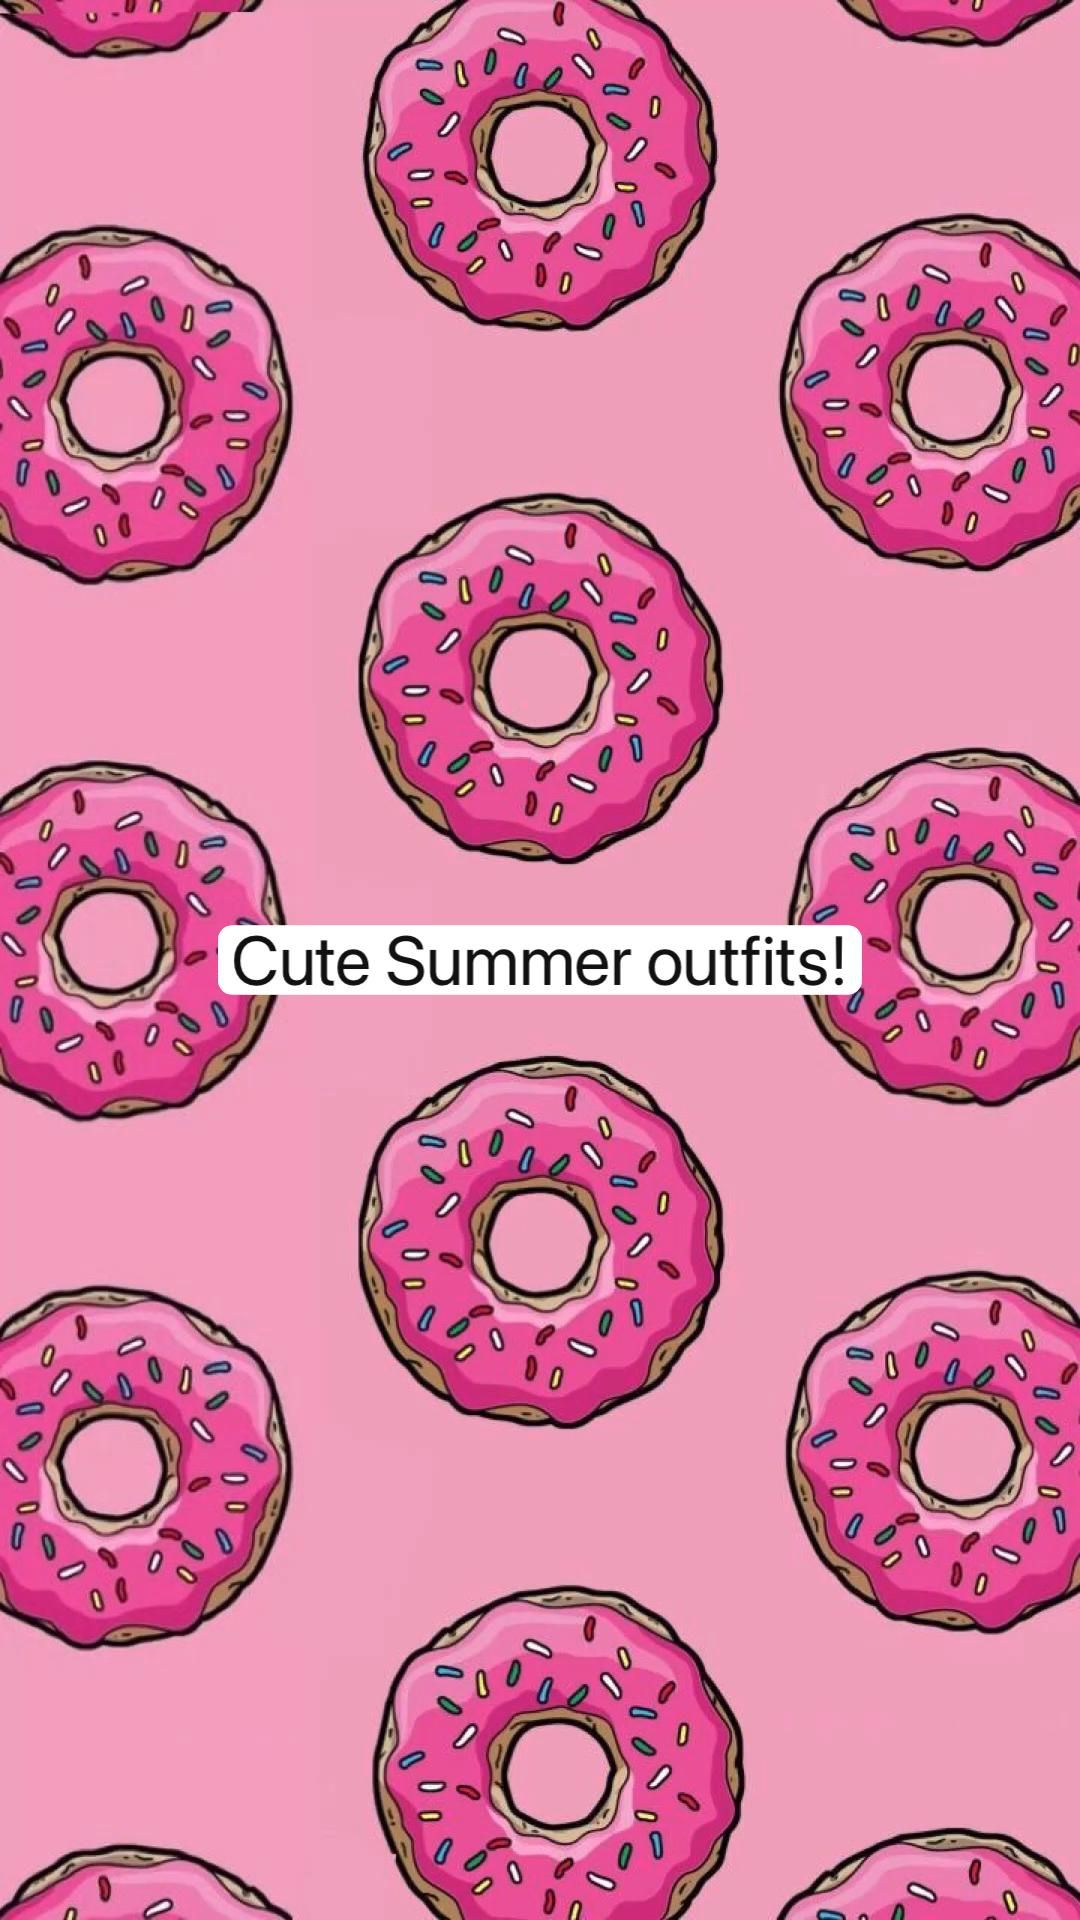 Cute Summer outfits!. Pink donuts wallpaper, Pink wallpaper background, Pink wallpaper